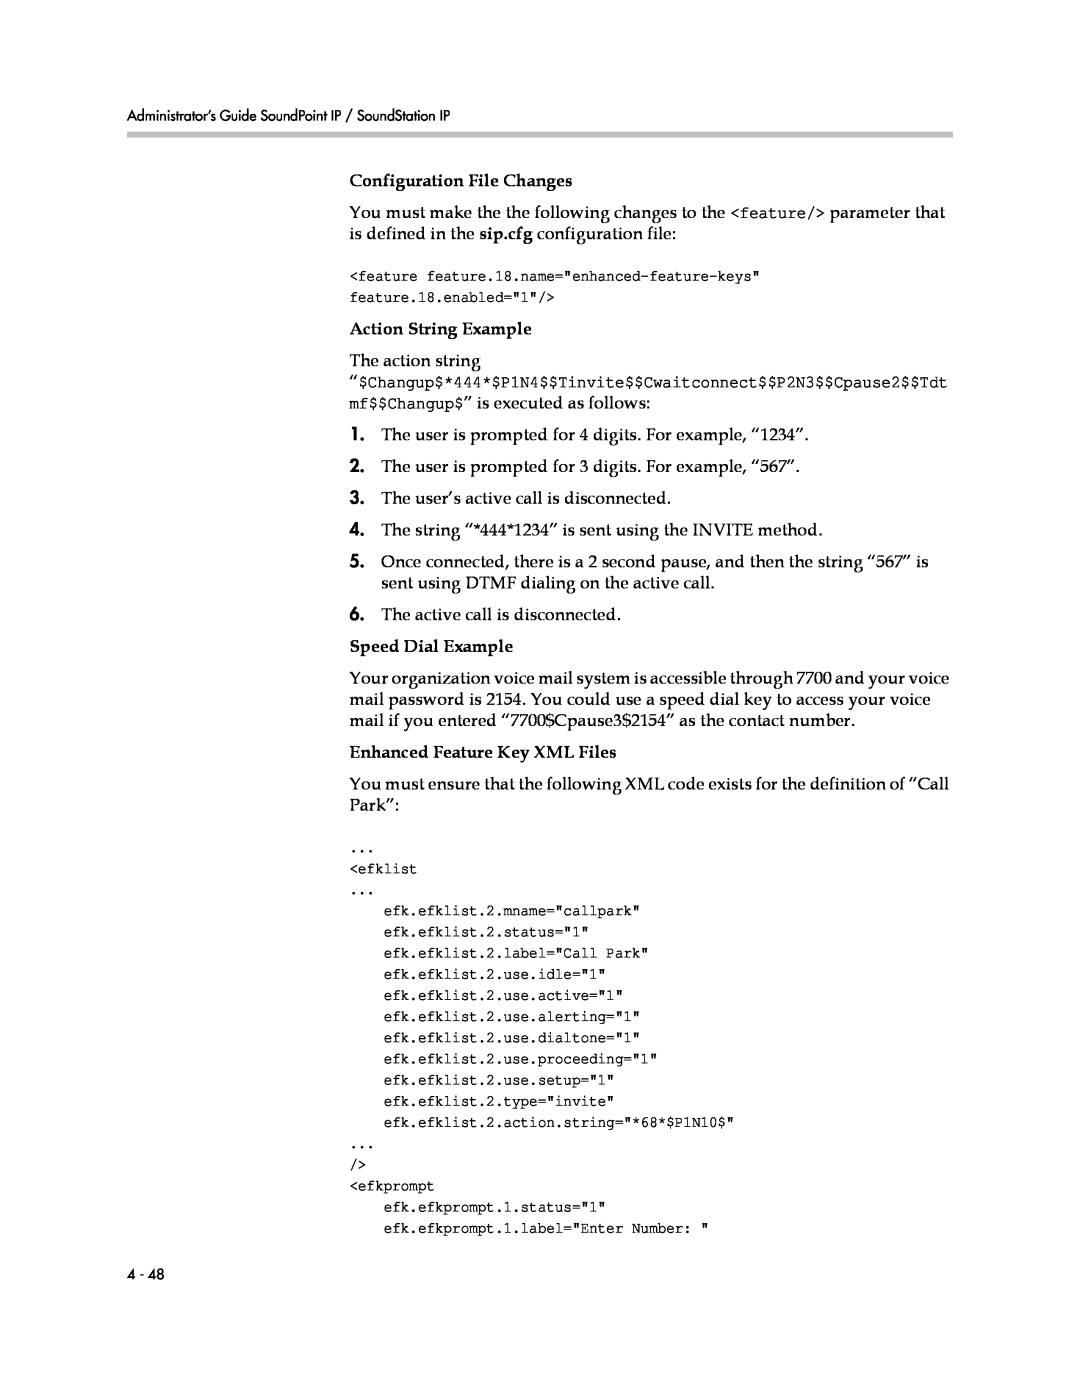 Polycom SIP 3.1 Configuration File Changes, Action String Example, Speed Dial Example, Enhanced Feature Key XML Files 